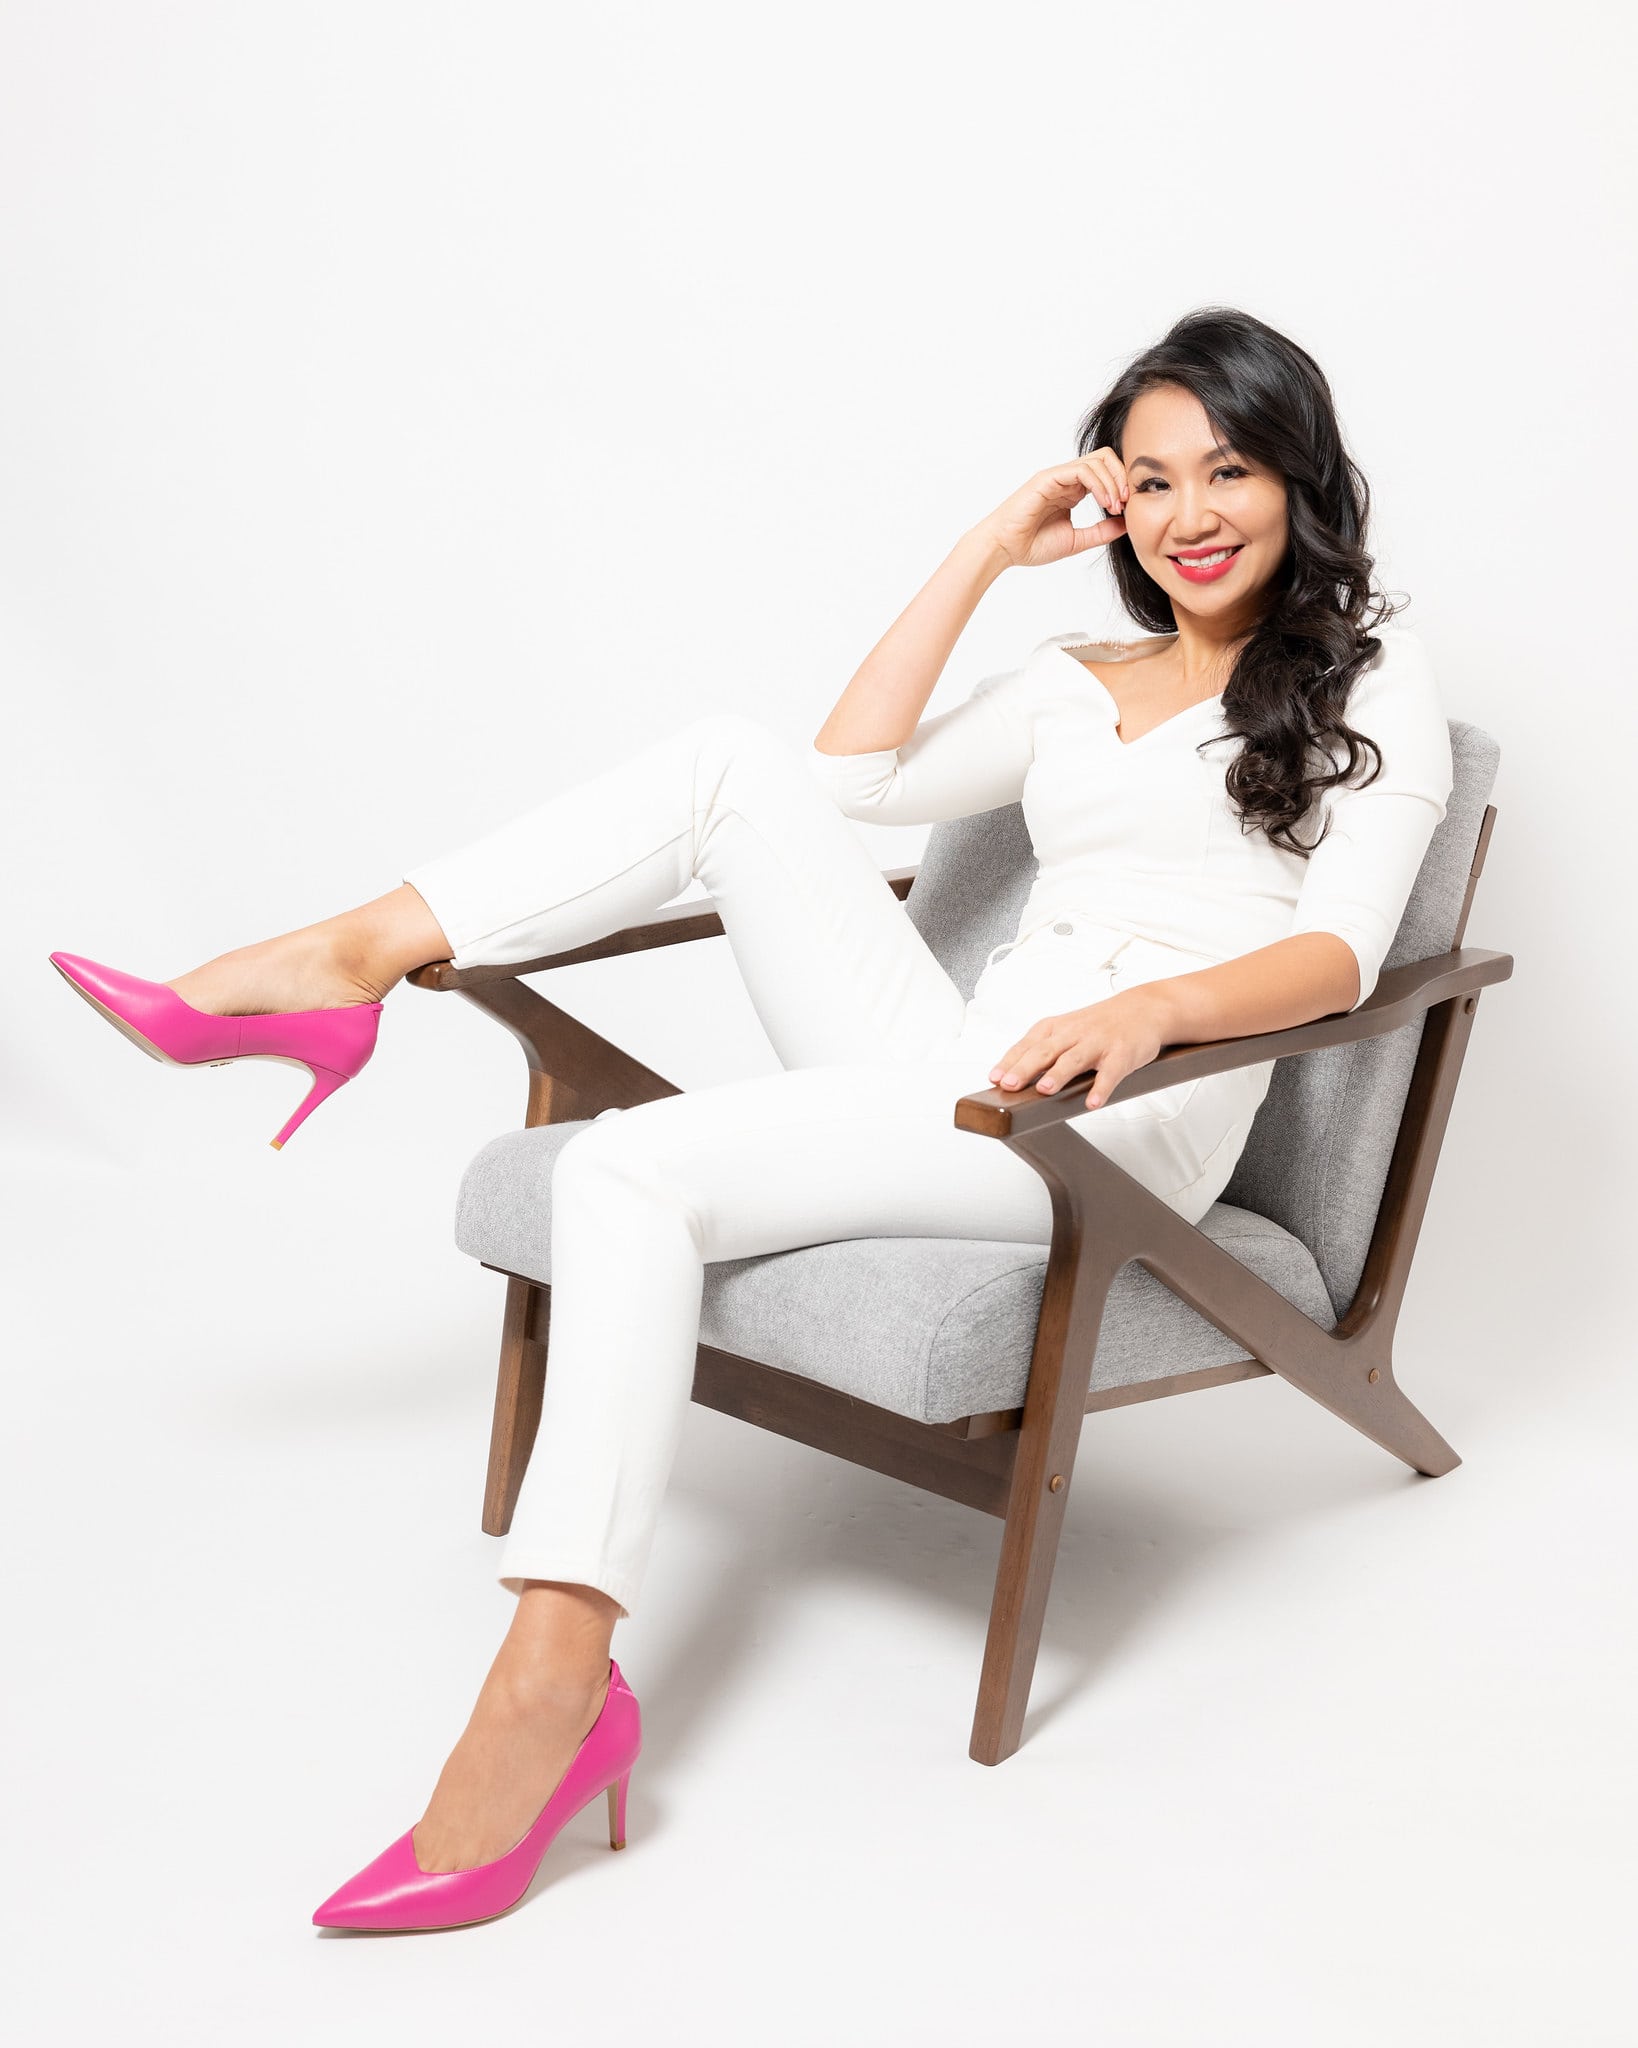 Stacey Chang, Founder of VEERAH